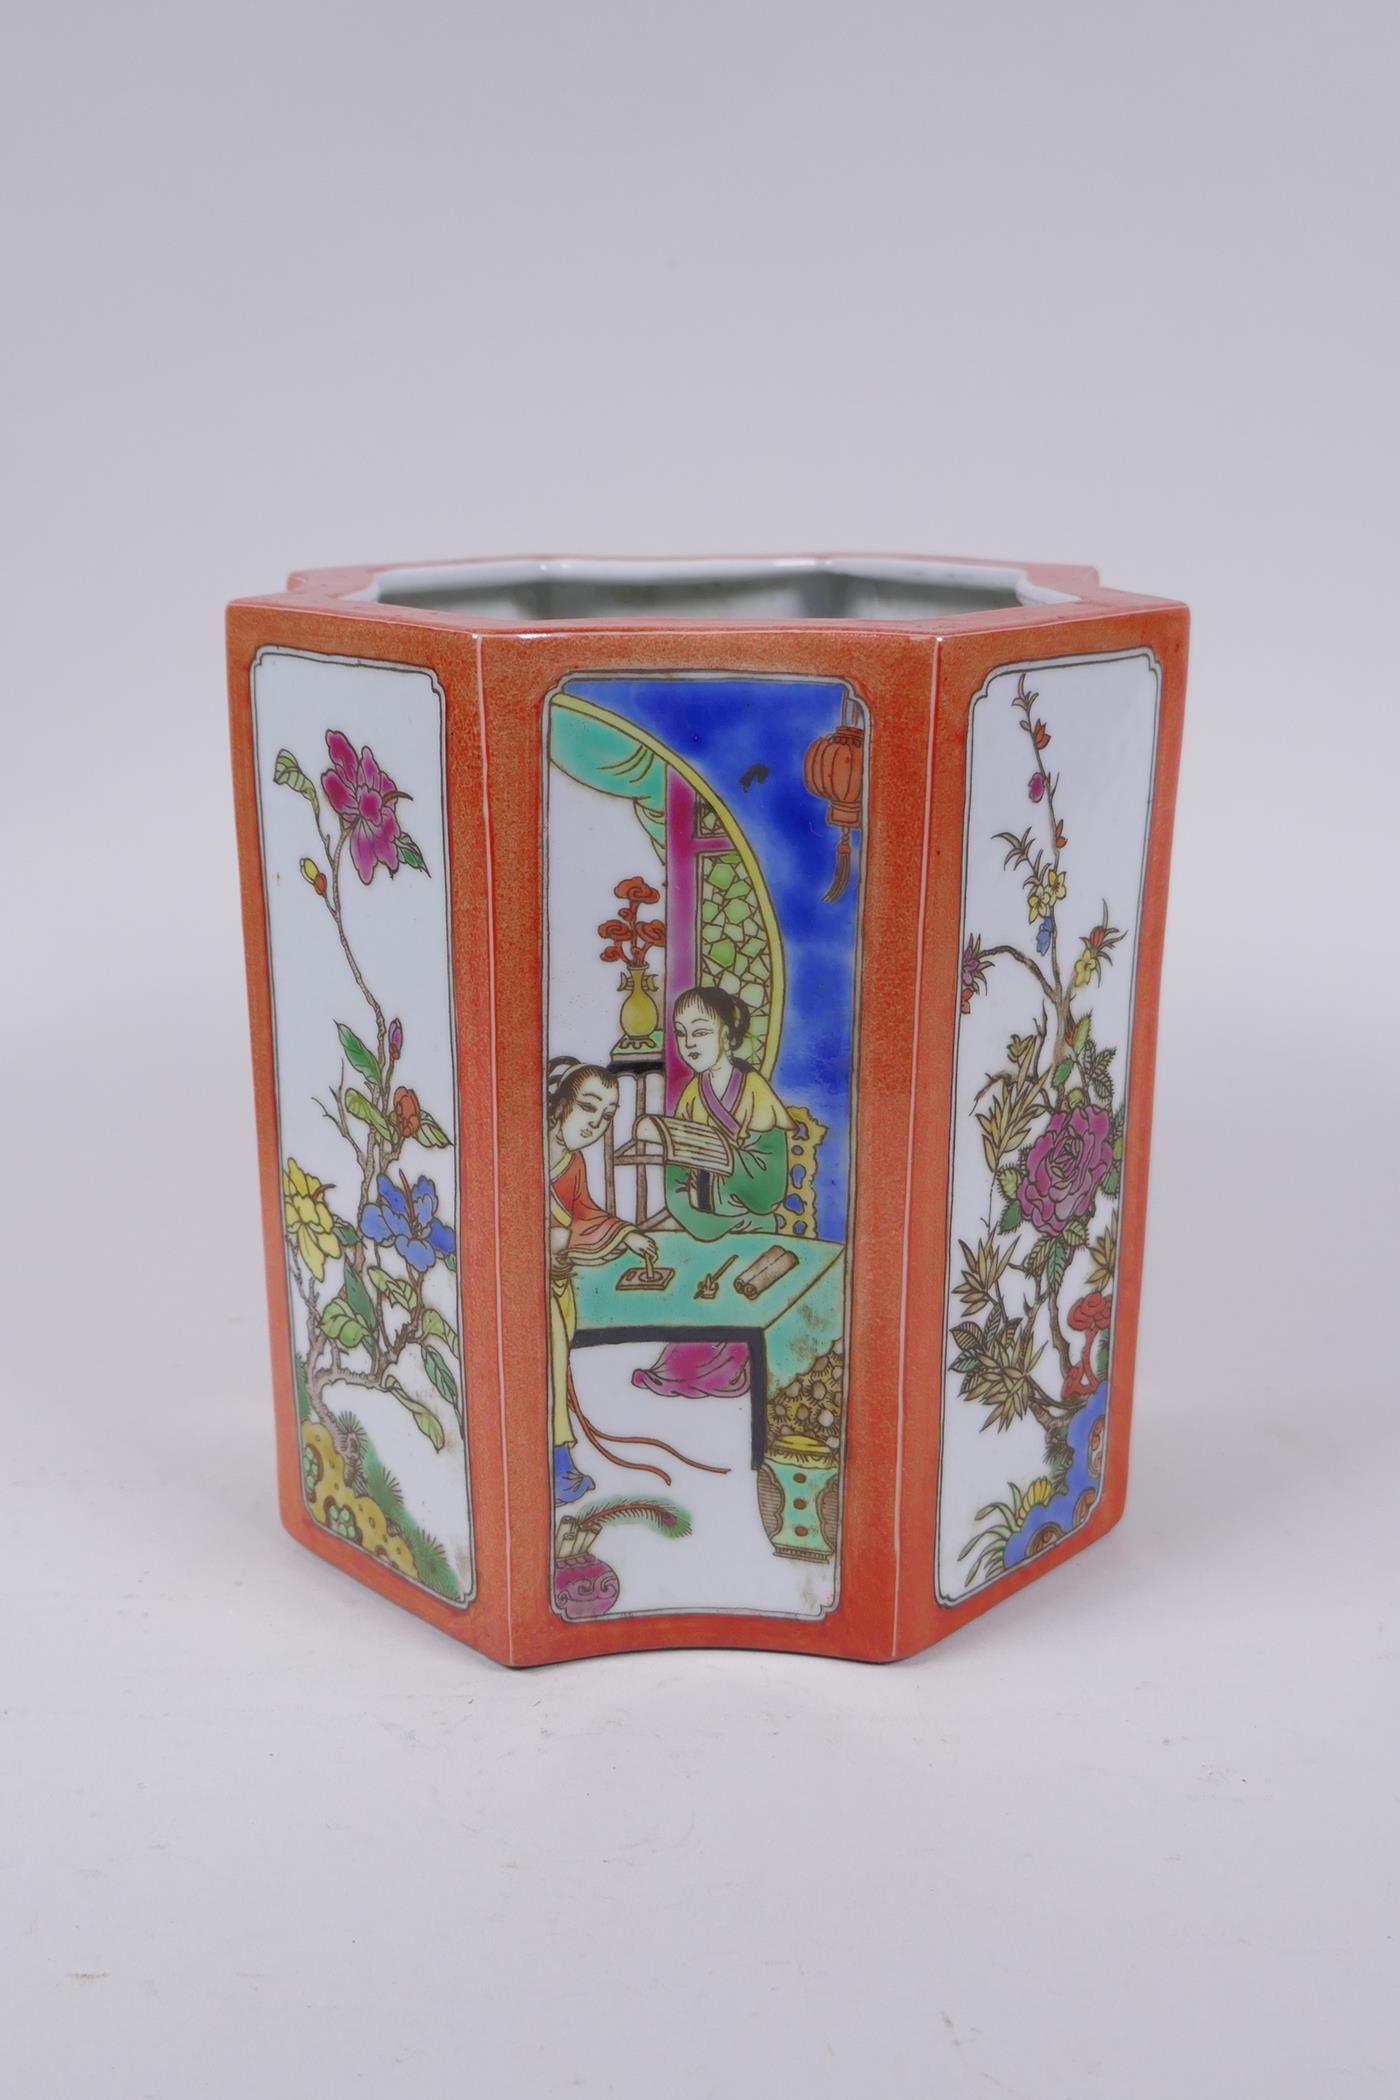 A Chinese shaped porcelain brush pot with famille vert decorative panels depicting figures and